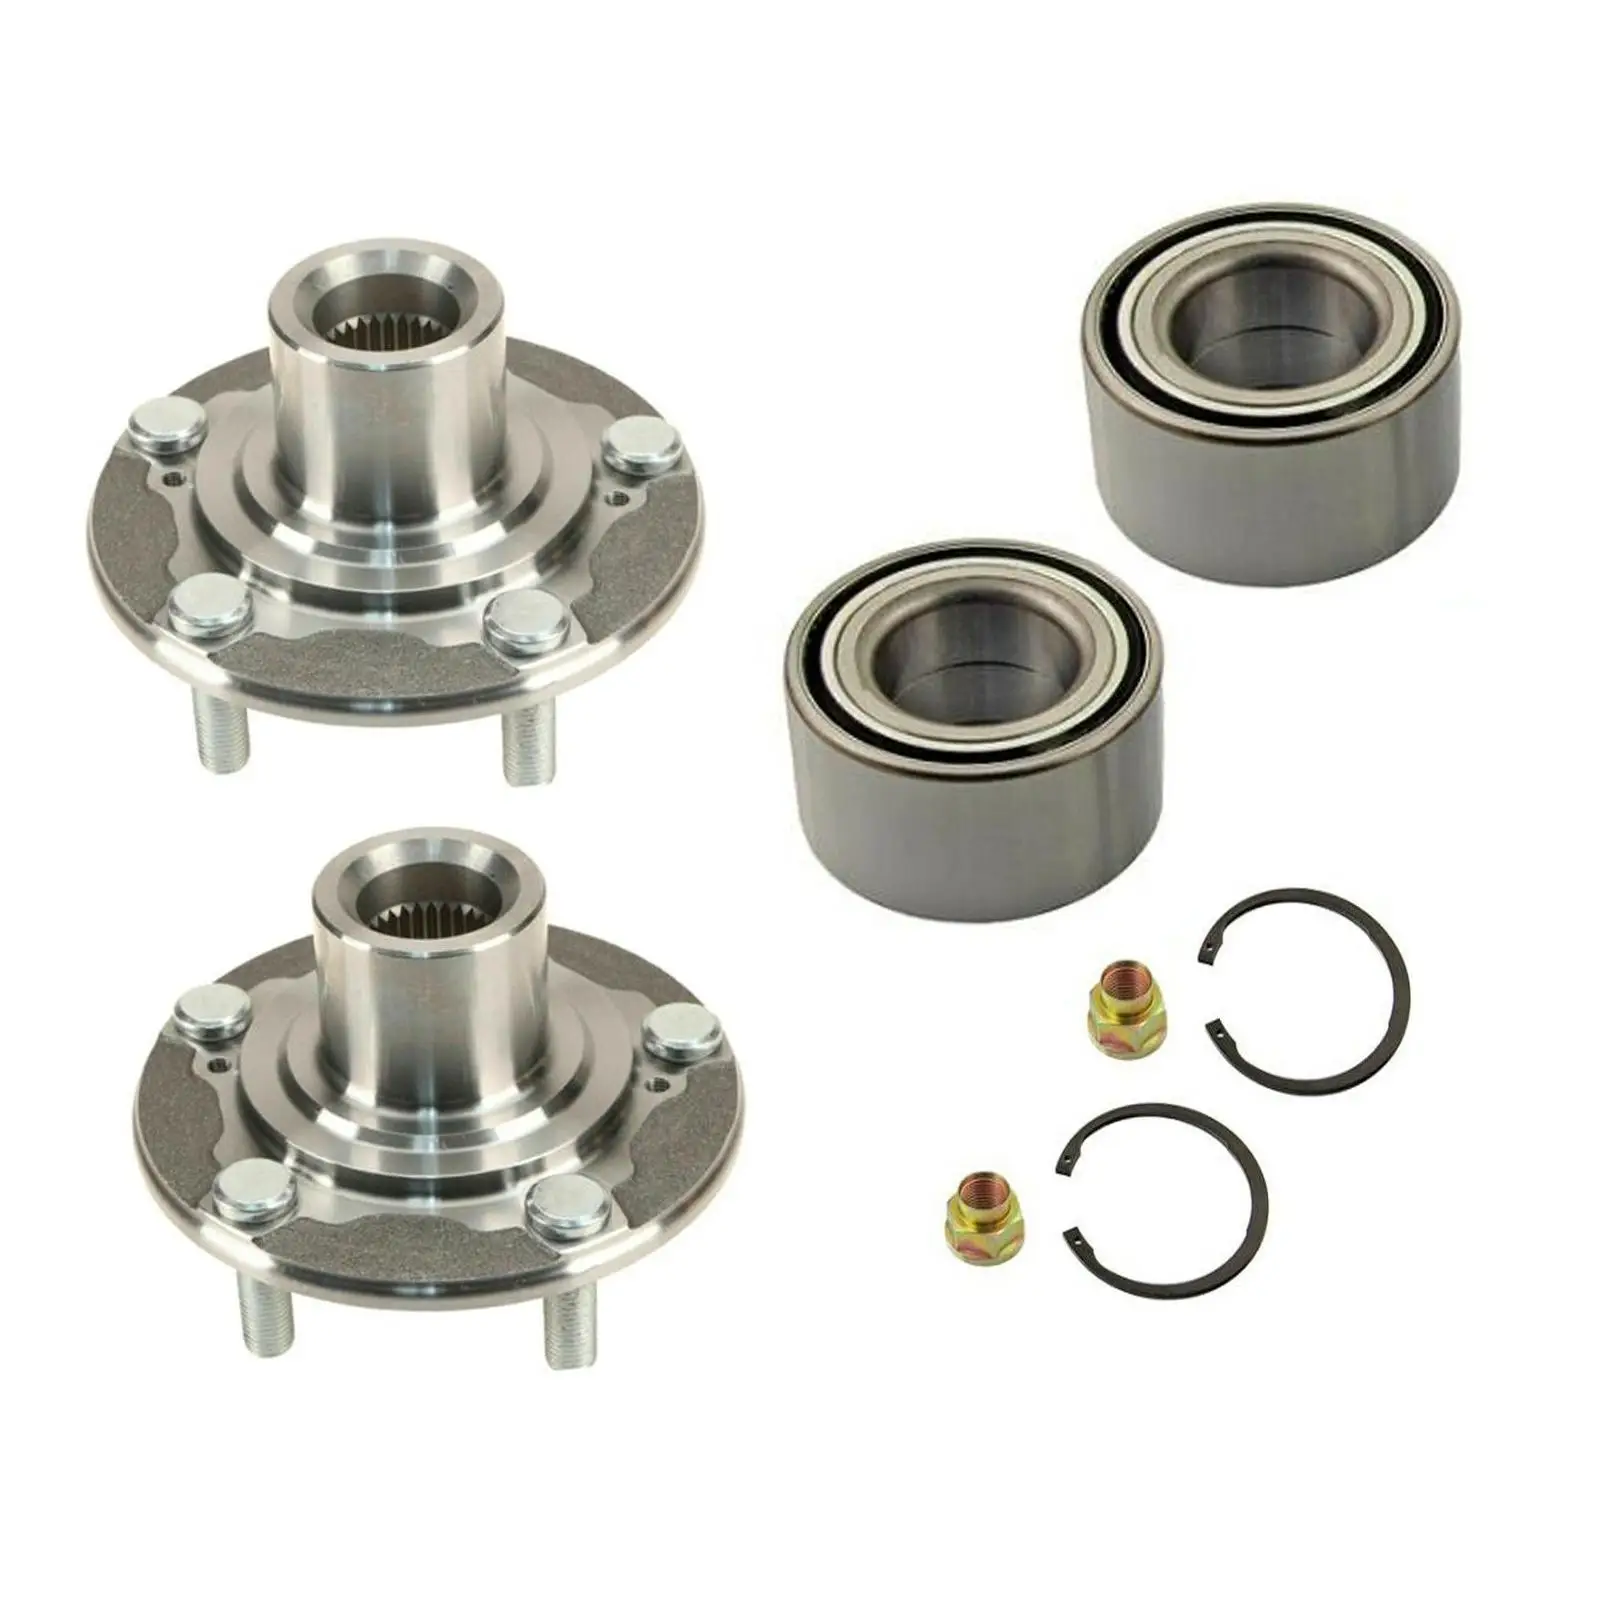 2 Pieces Front Wheel Hub Bearing Kits Replacement Assembly Easy Installation Durable Spare Parts 510118 for Honda Accord